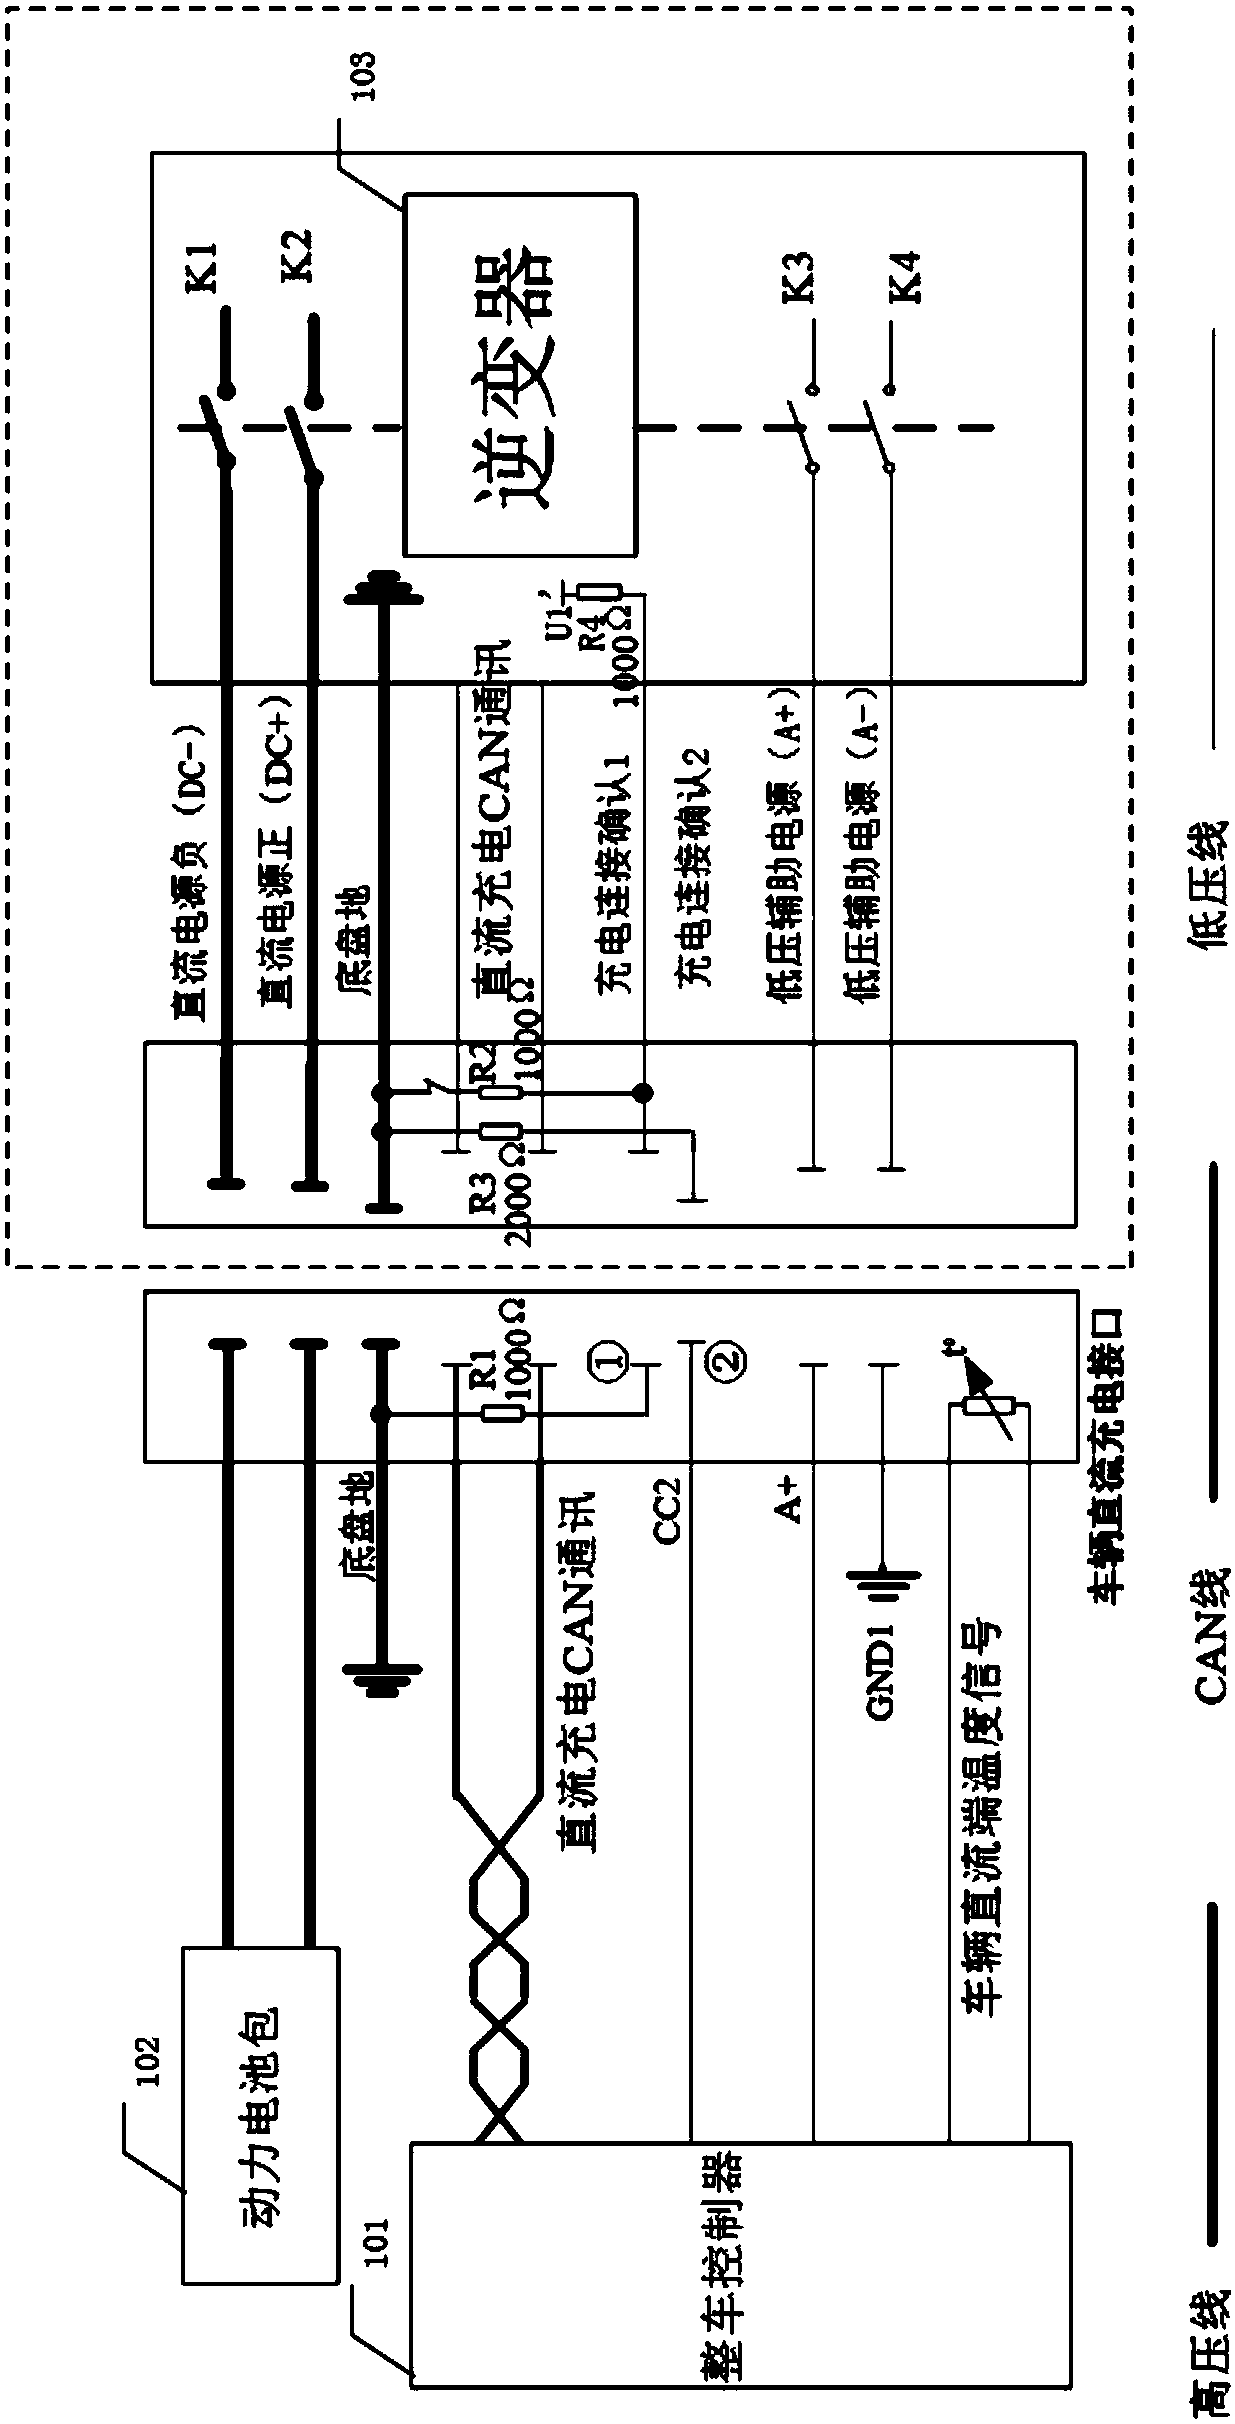 Control method and device for discharging electric vehicle and whole vehicle controller